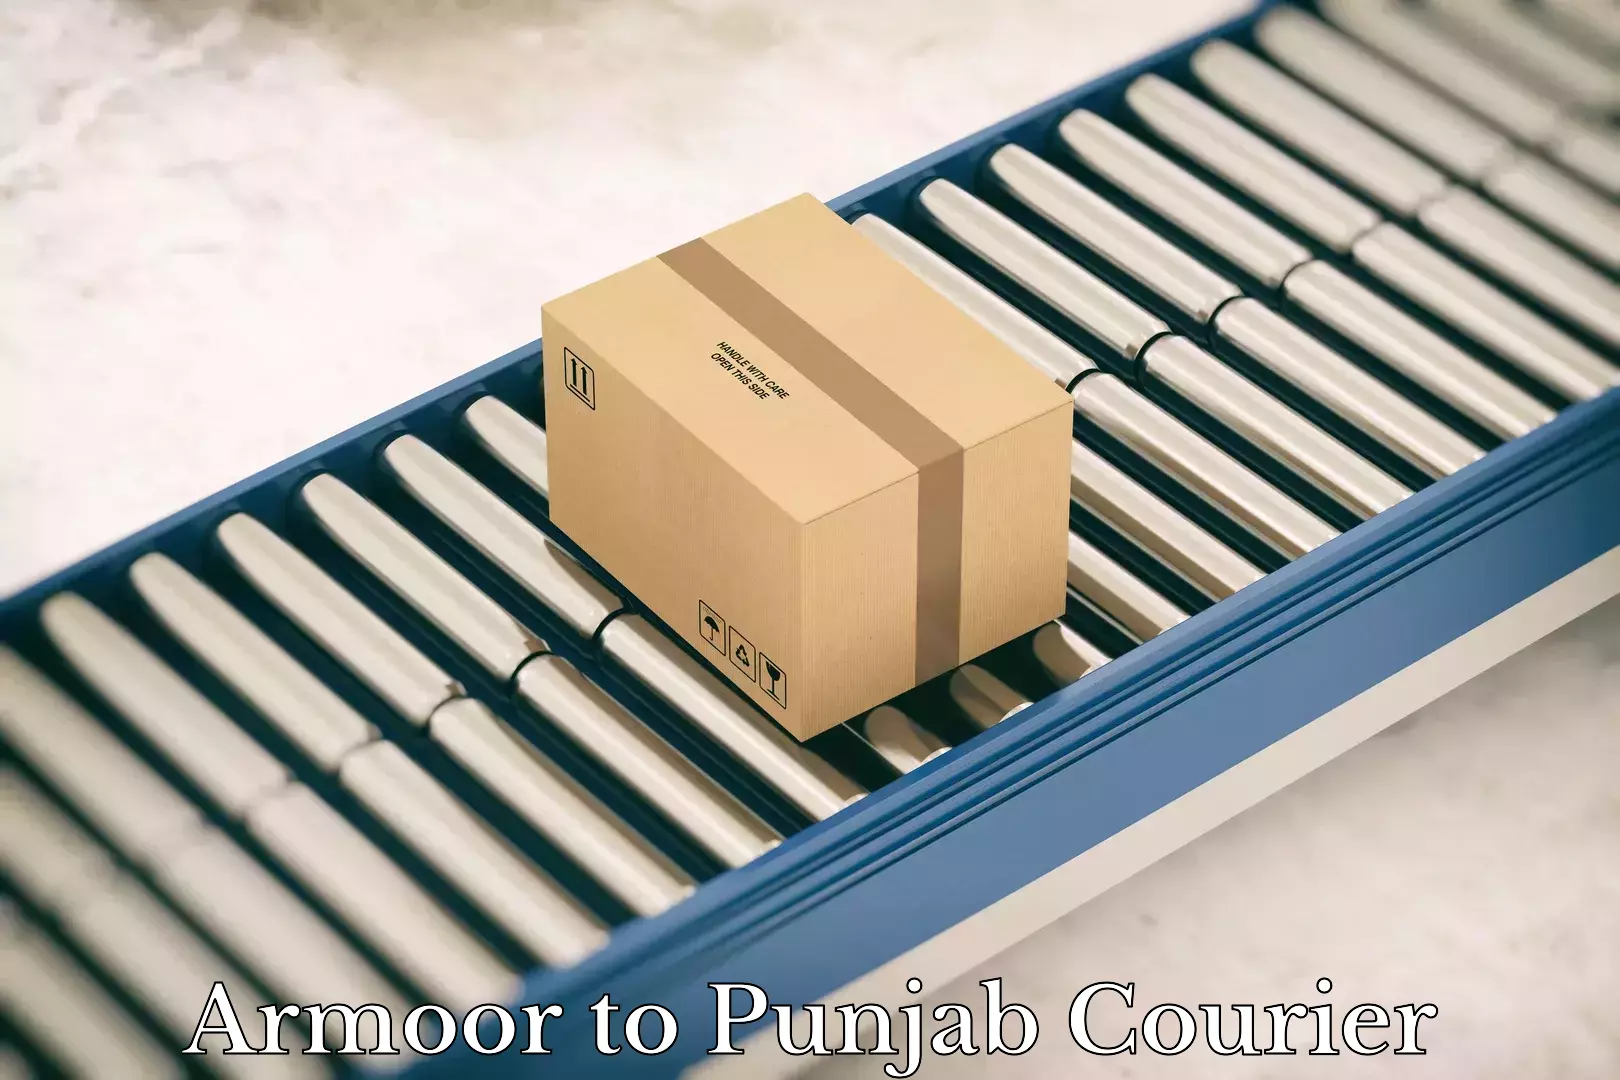 Reliable parcel services Armoor to Punjab